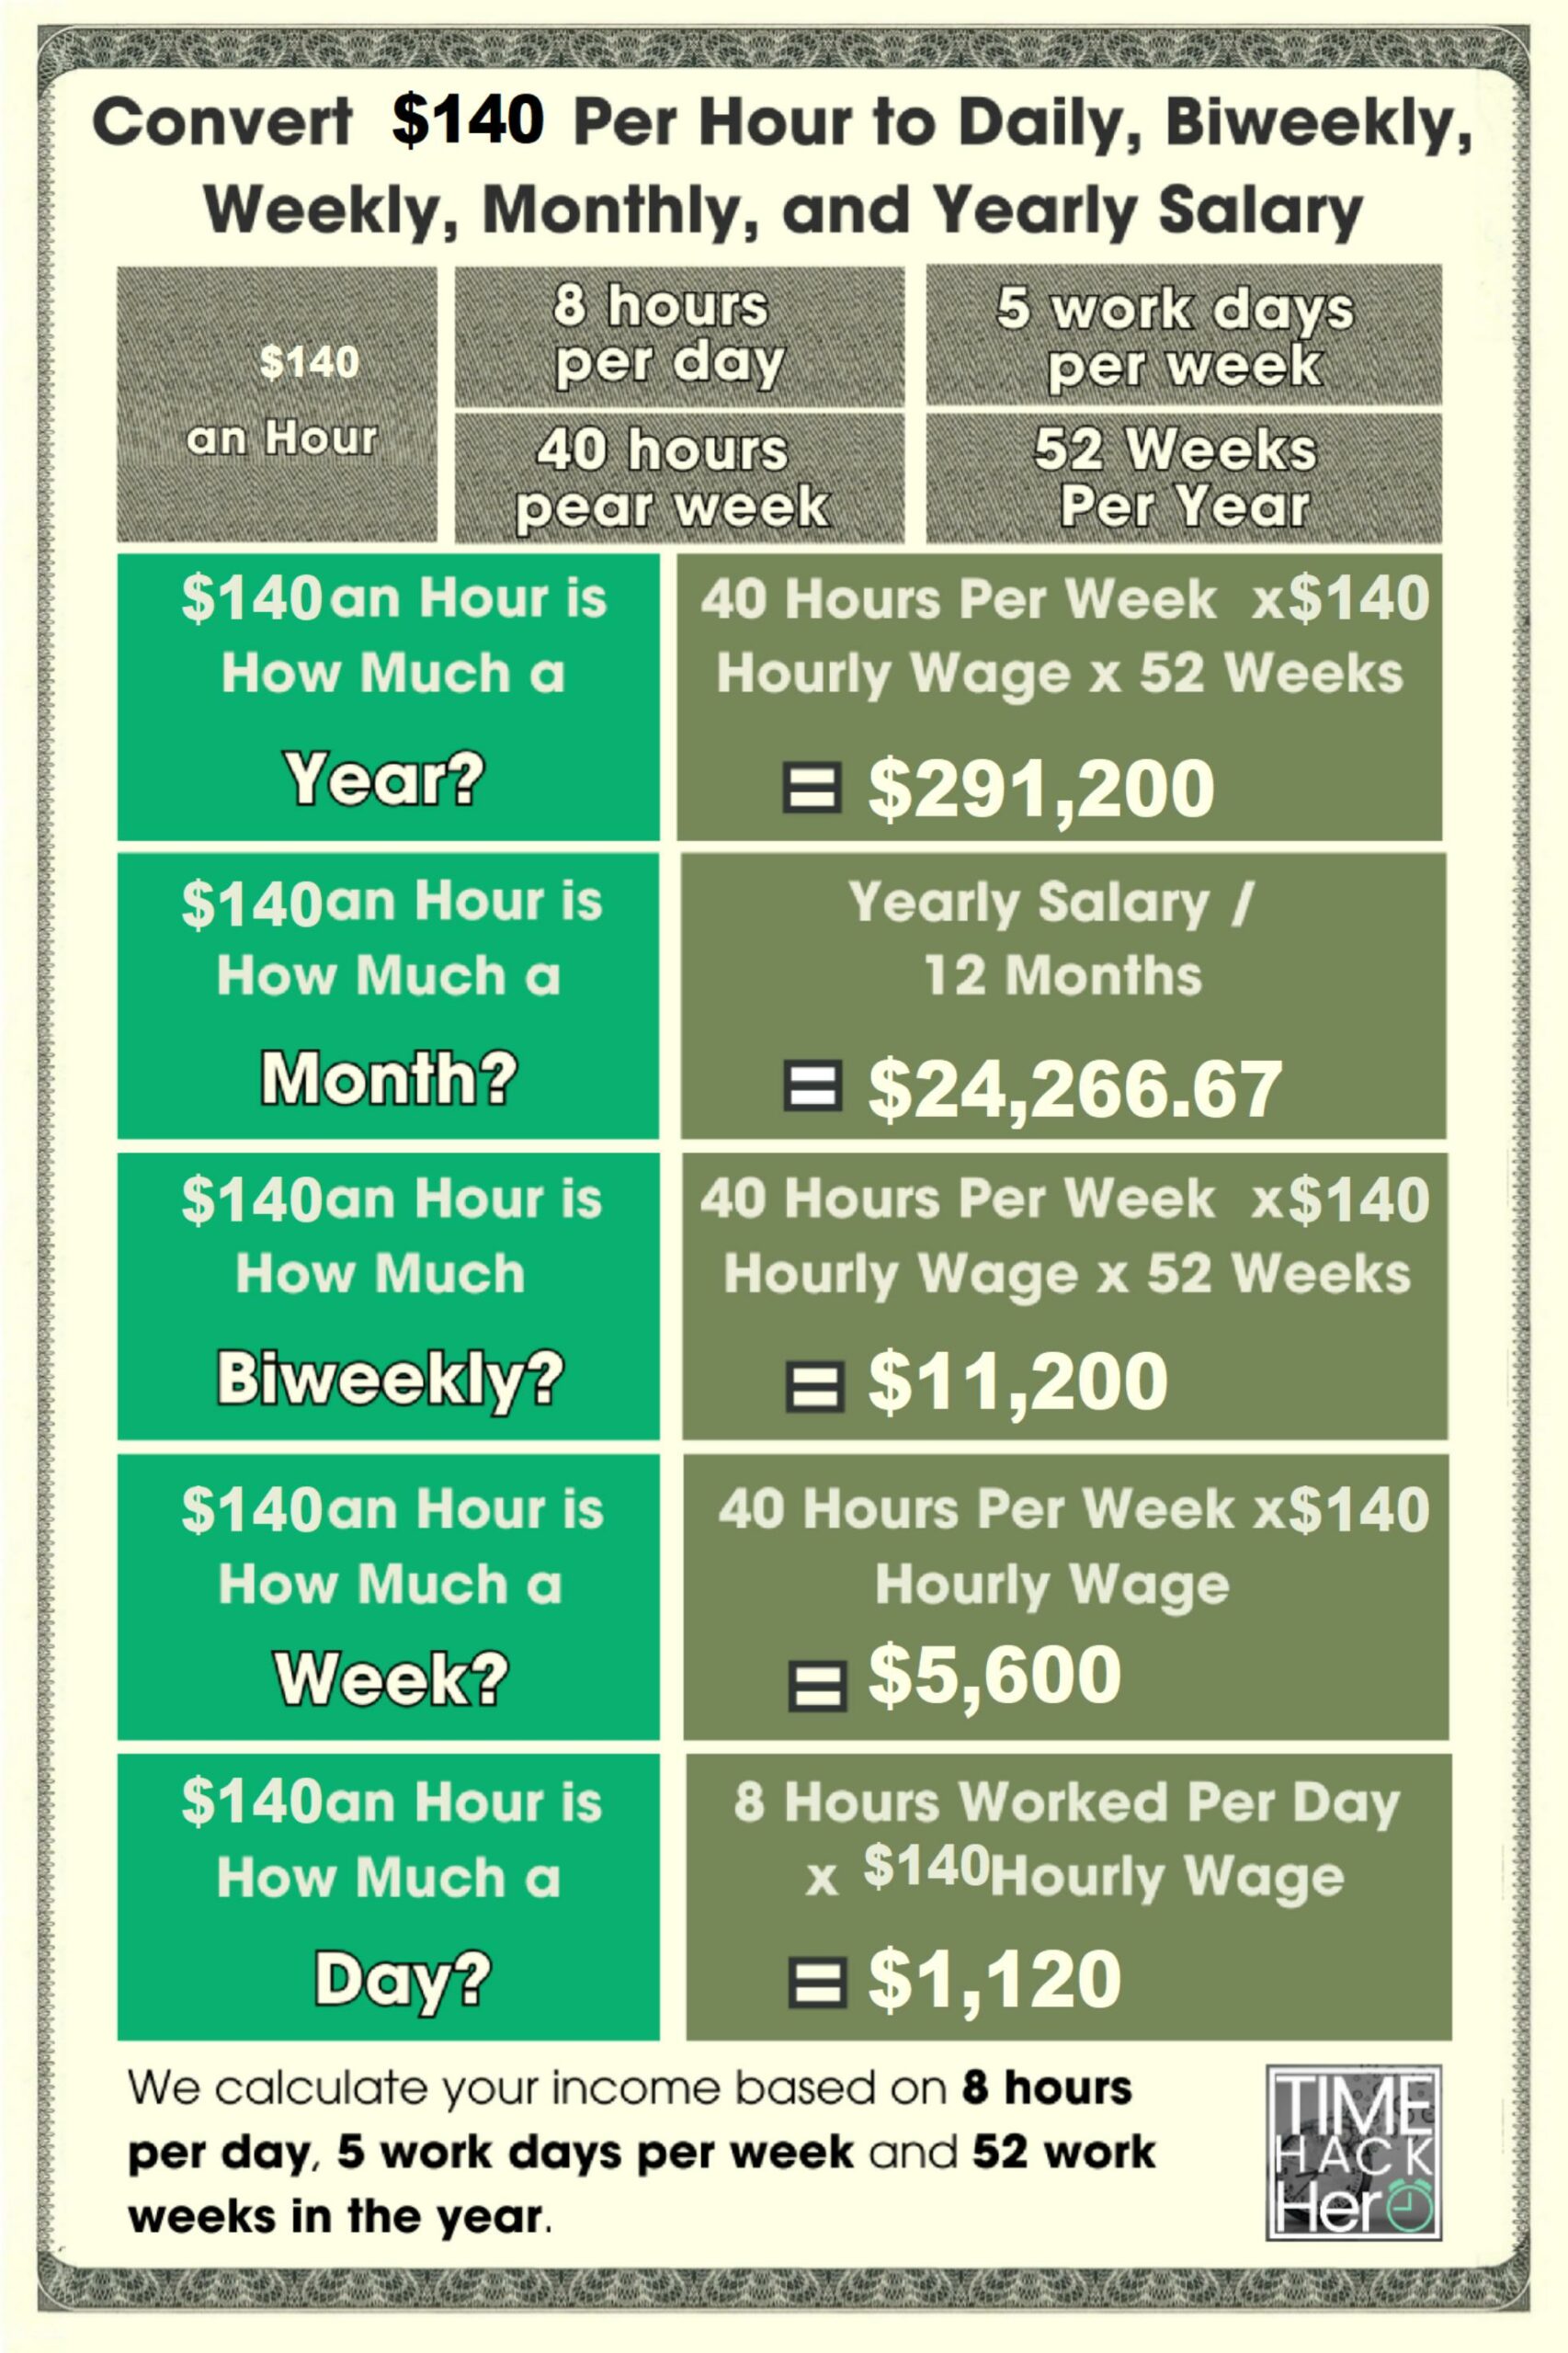 Convert $140 Per Hour to Weekly, Monthly, and Yearly Salary